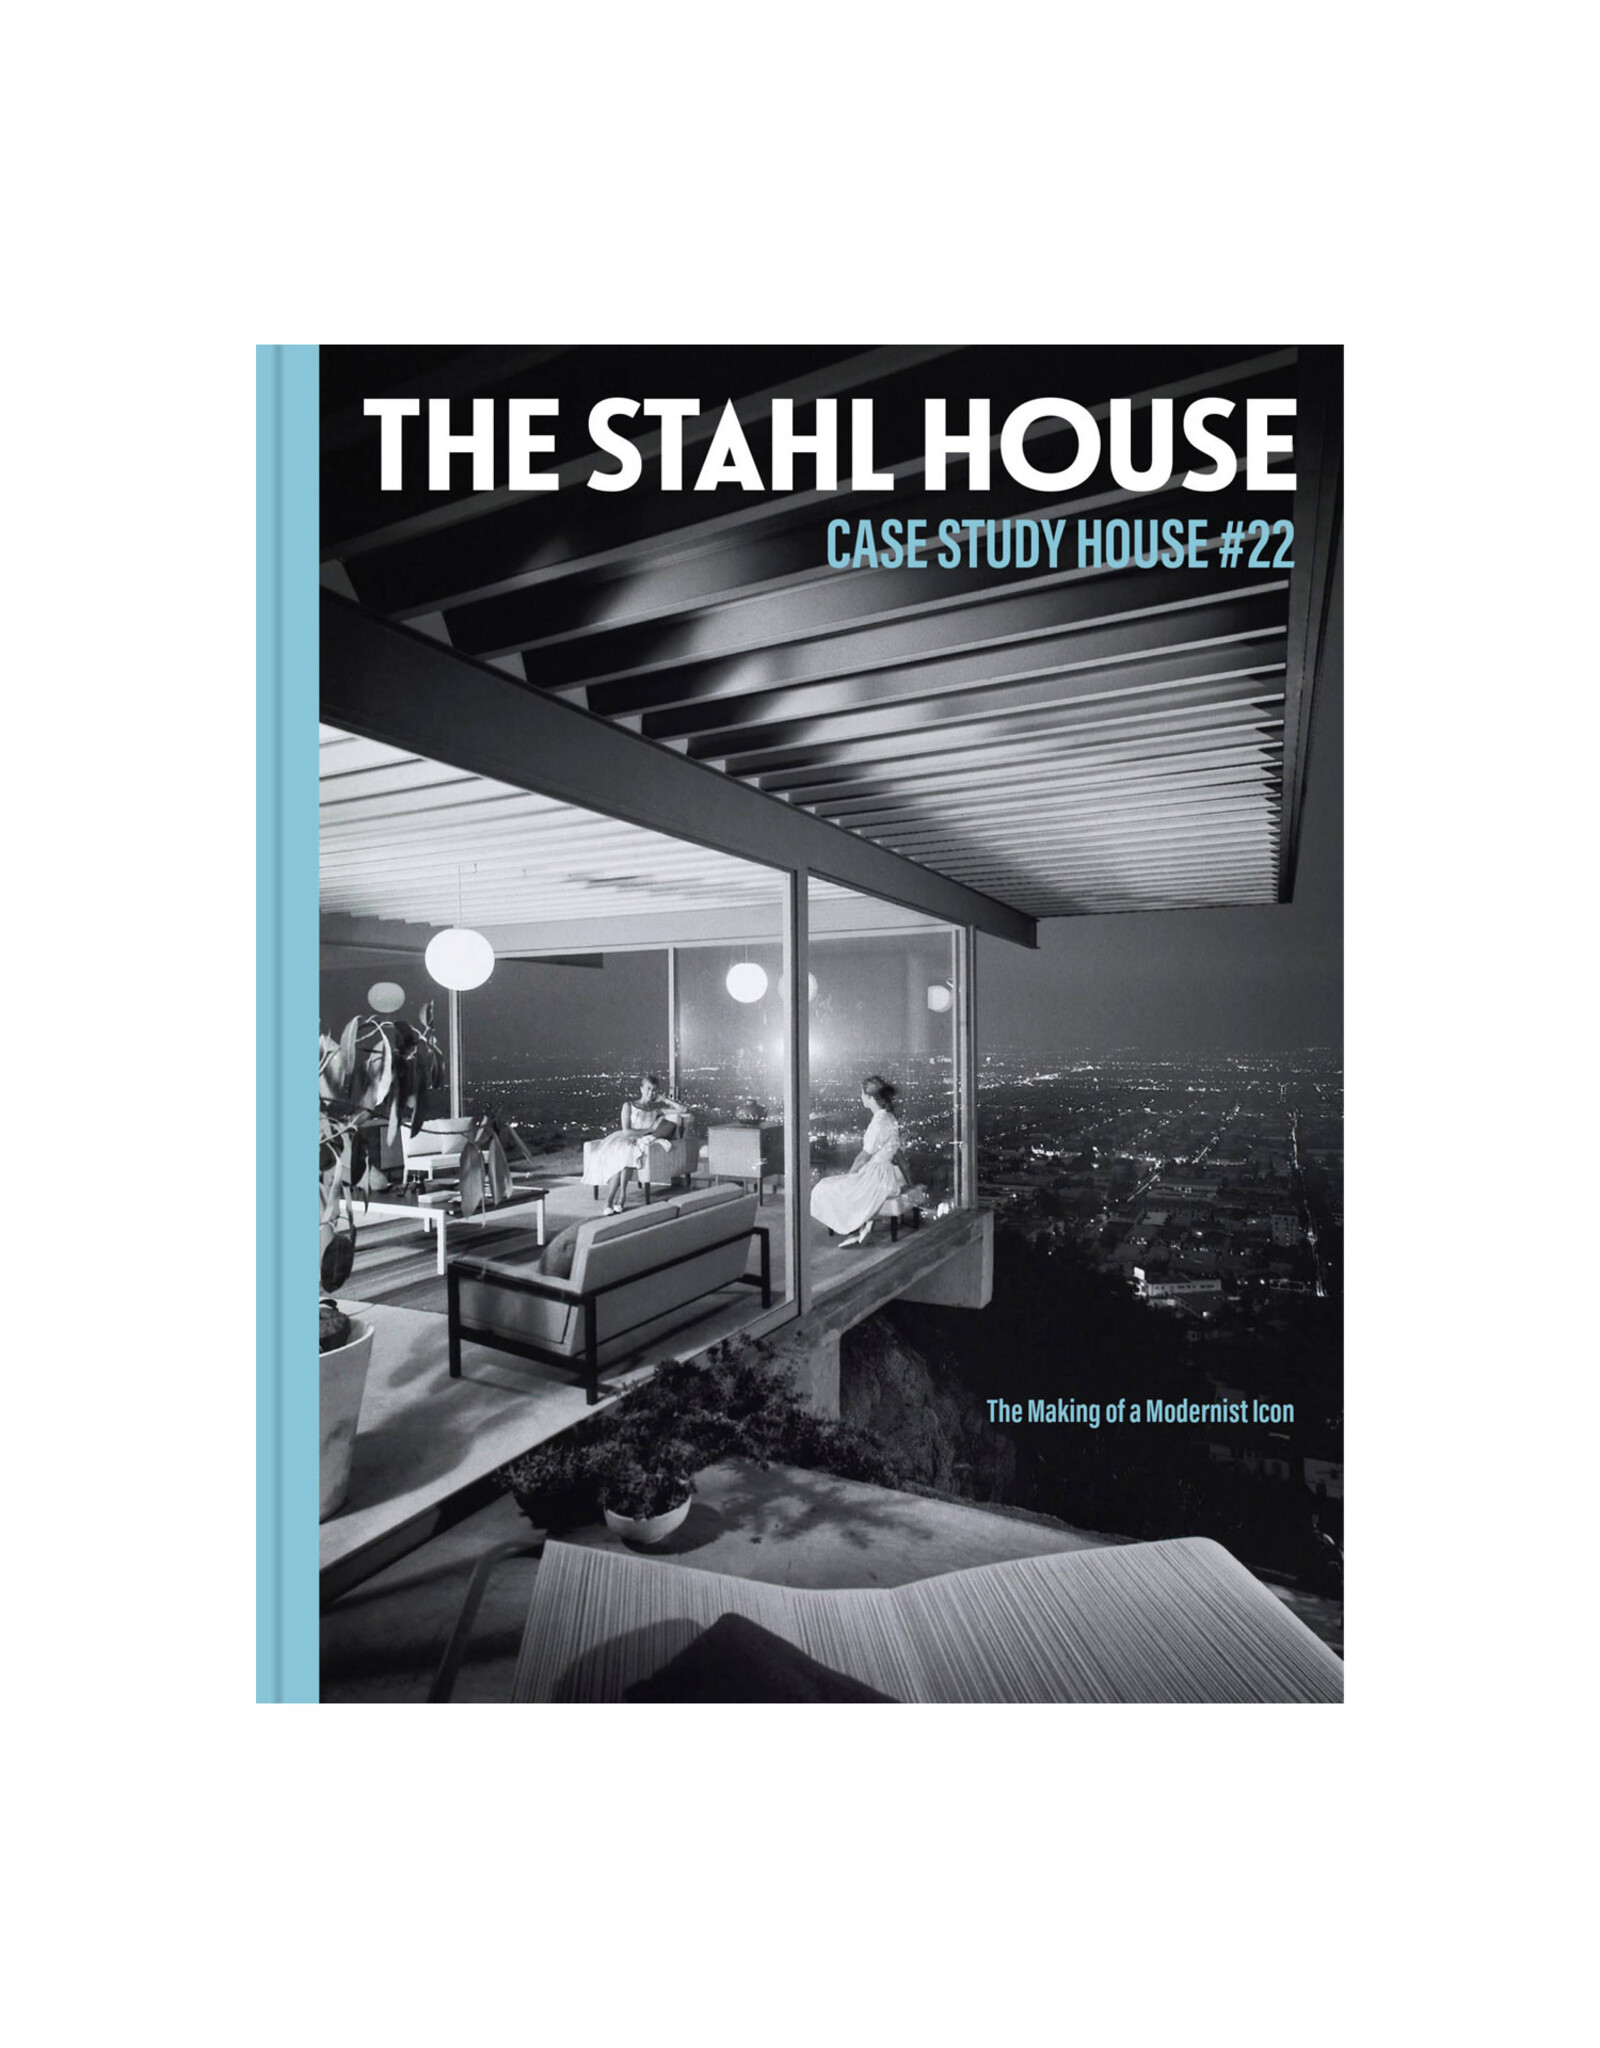 The Stahl House: Case Study House #22